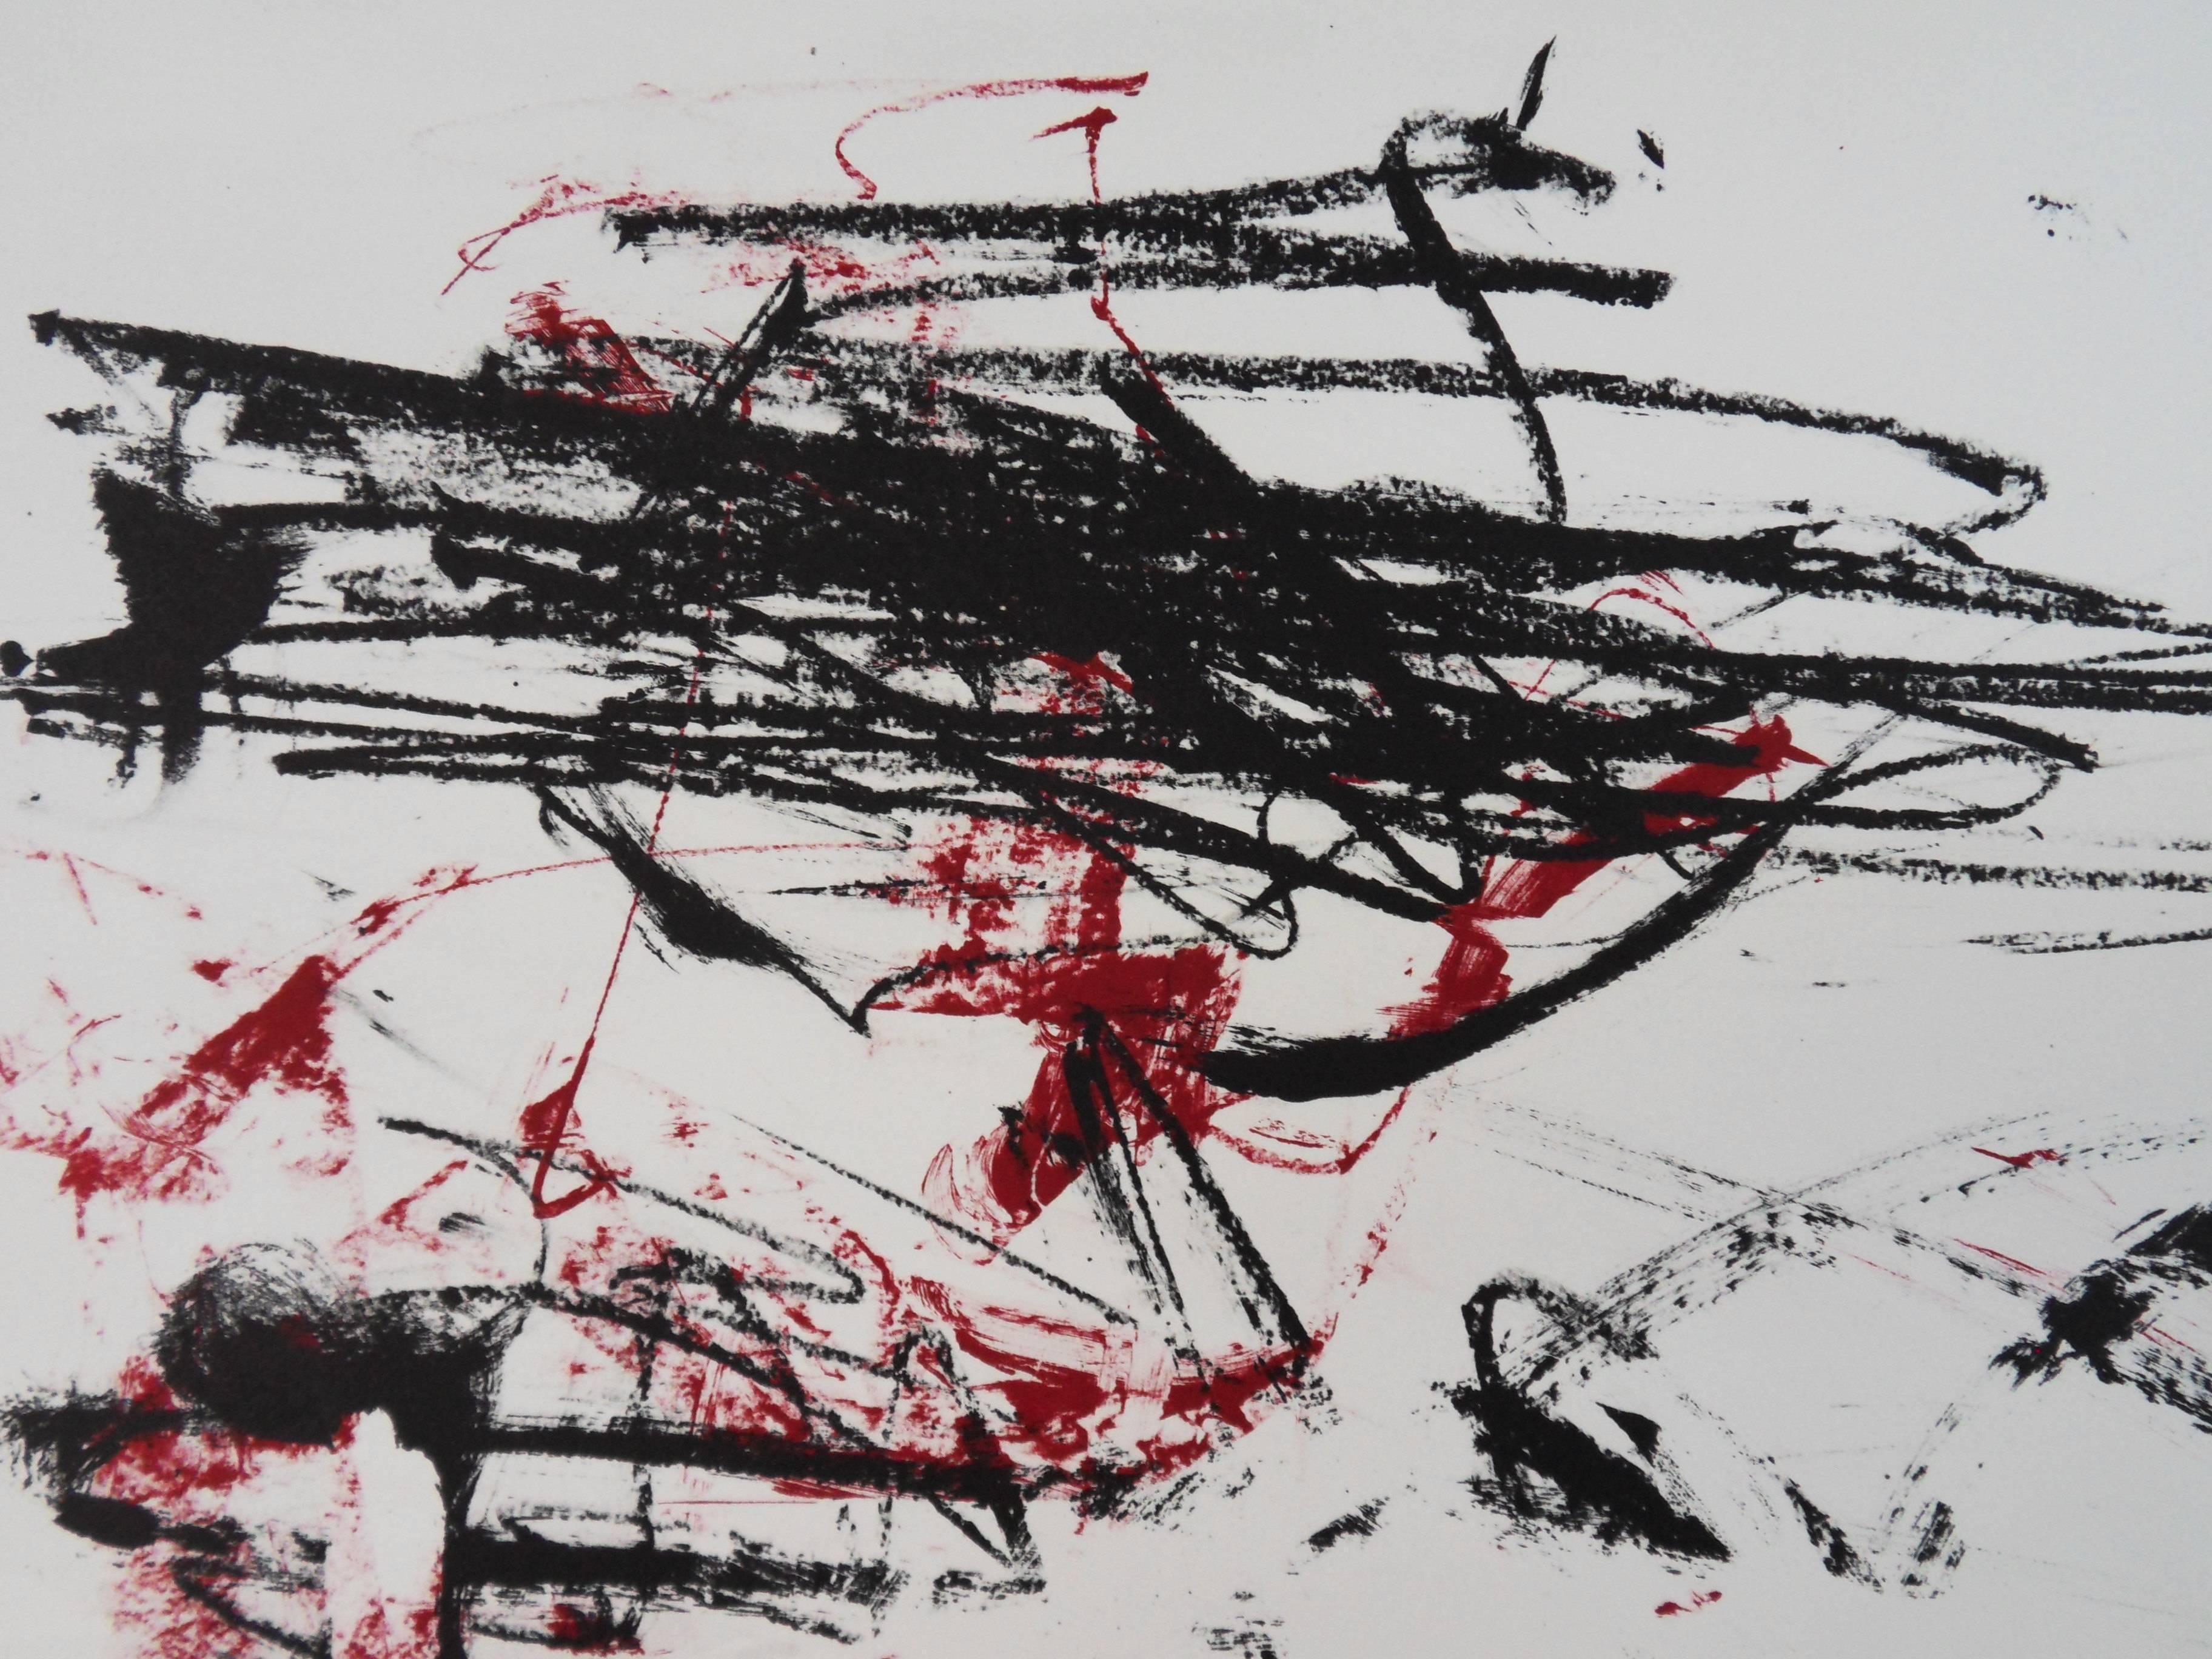 Joan MITCHELL
Trees in red (c. 1990)

Original lithograph
Pencil signed
Limited to 125 copies pencil numbered 
On  Arches Vellum 76 x 56 cm (c. 22x30